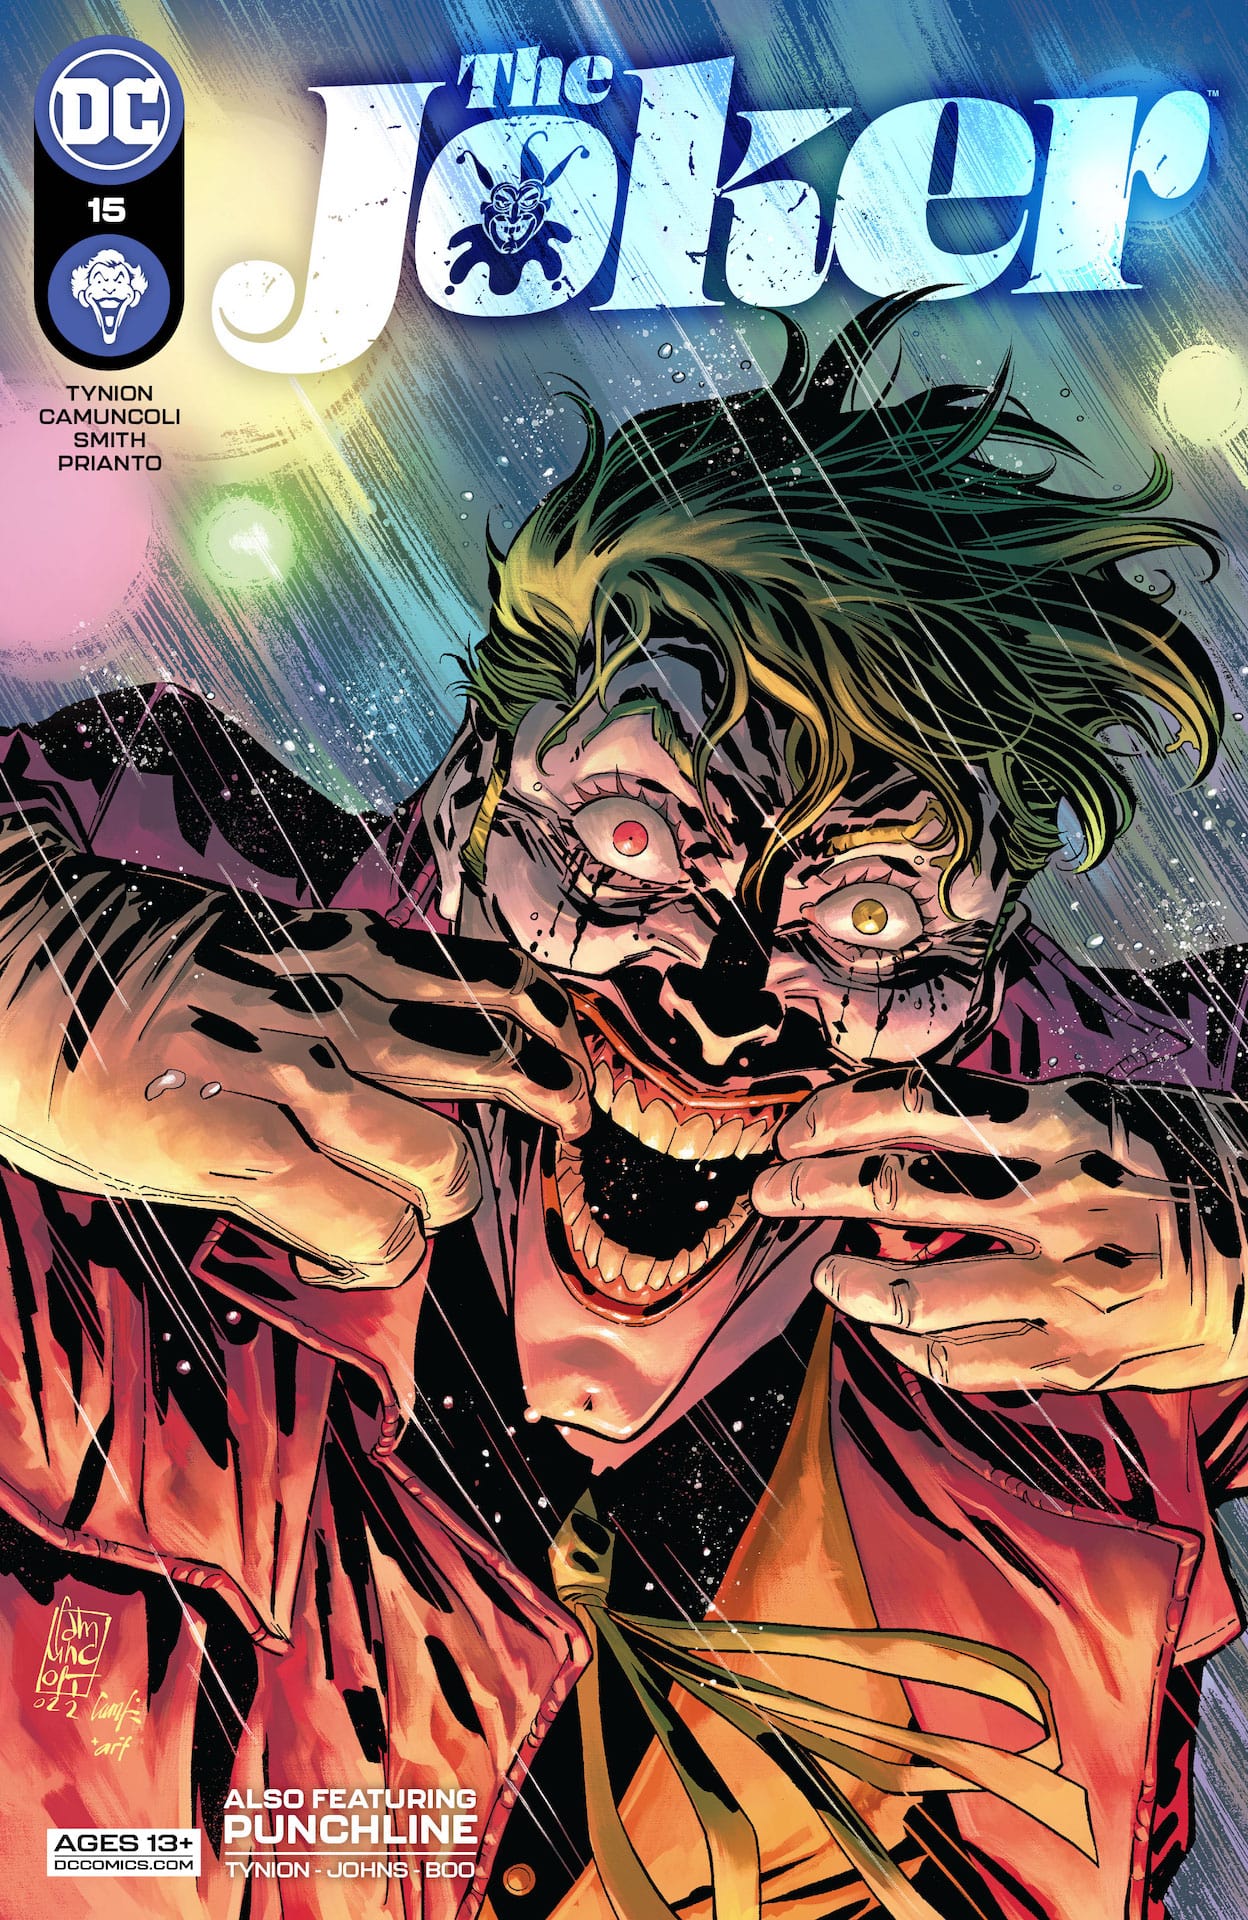 DC Preview: The Joker #15